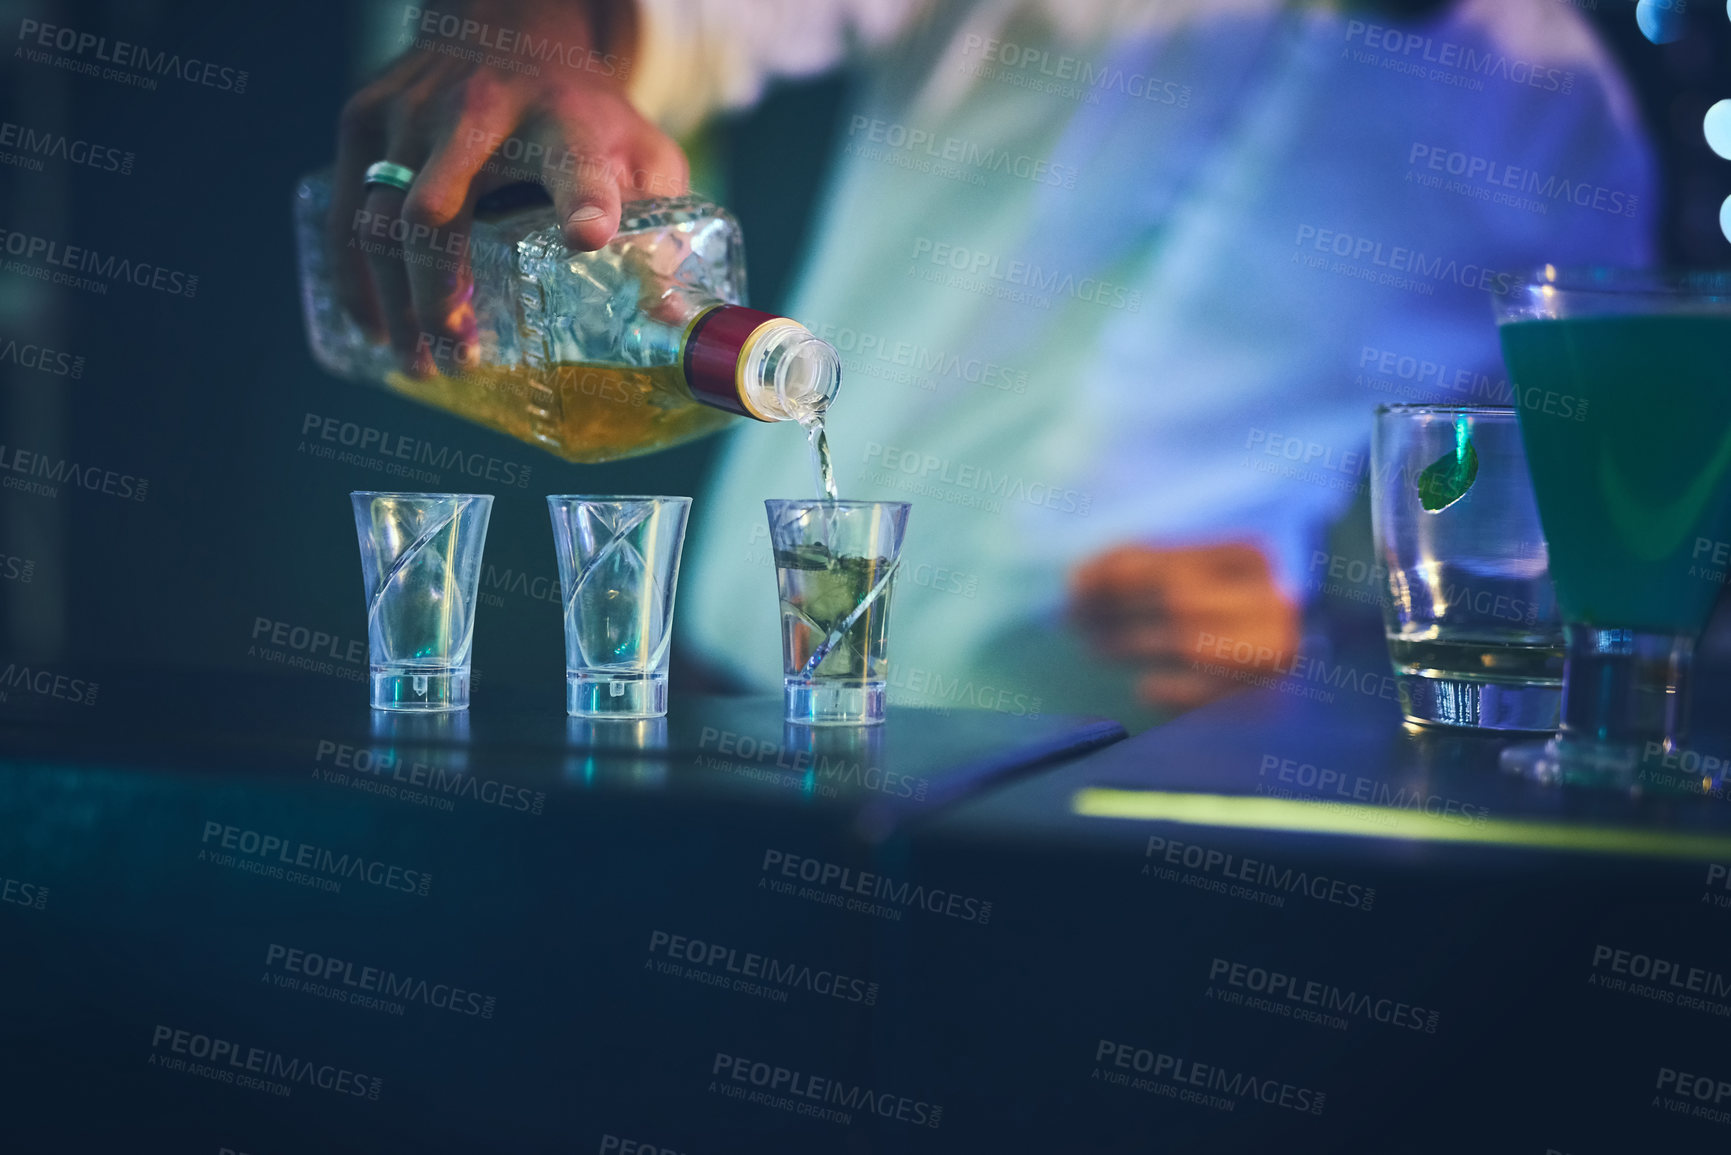 Buy stock photo Shot of an unidentifiable barman pouring shots in a nightclub